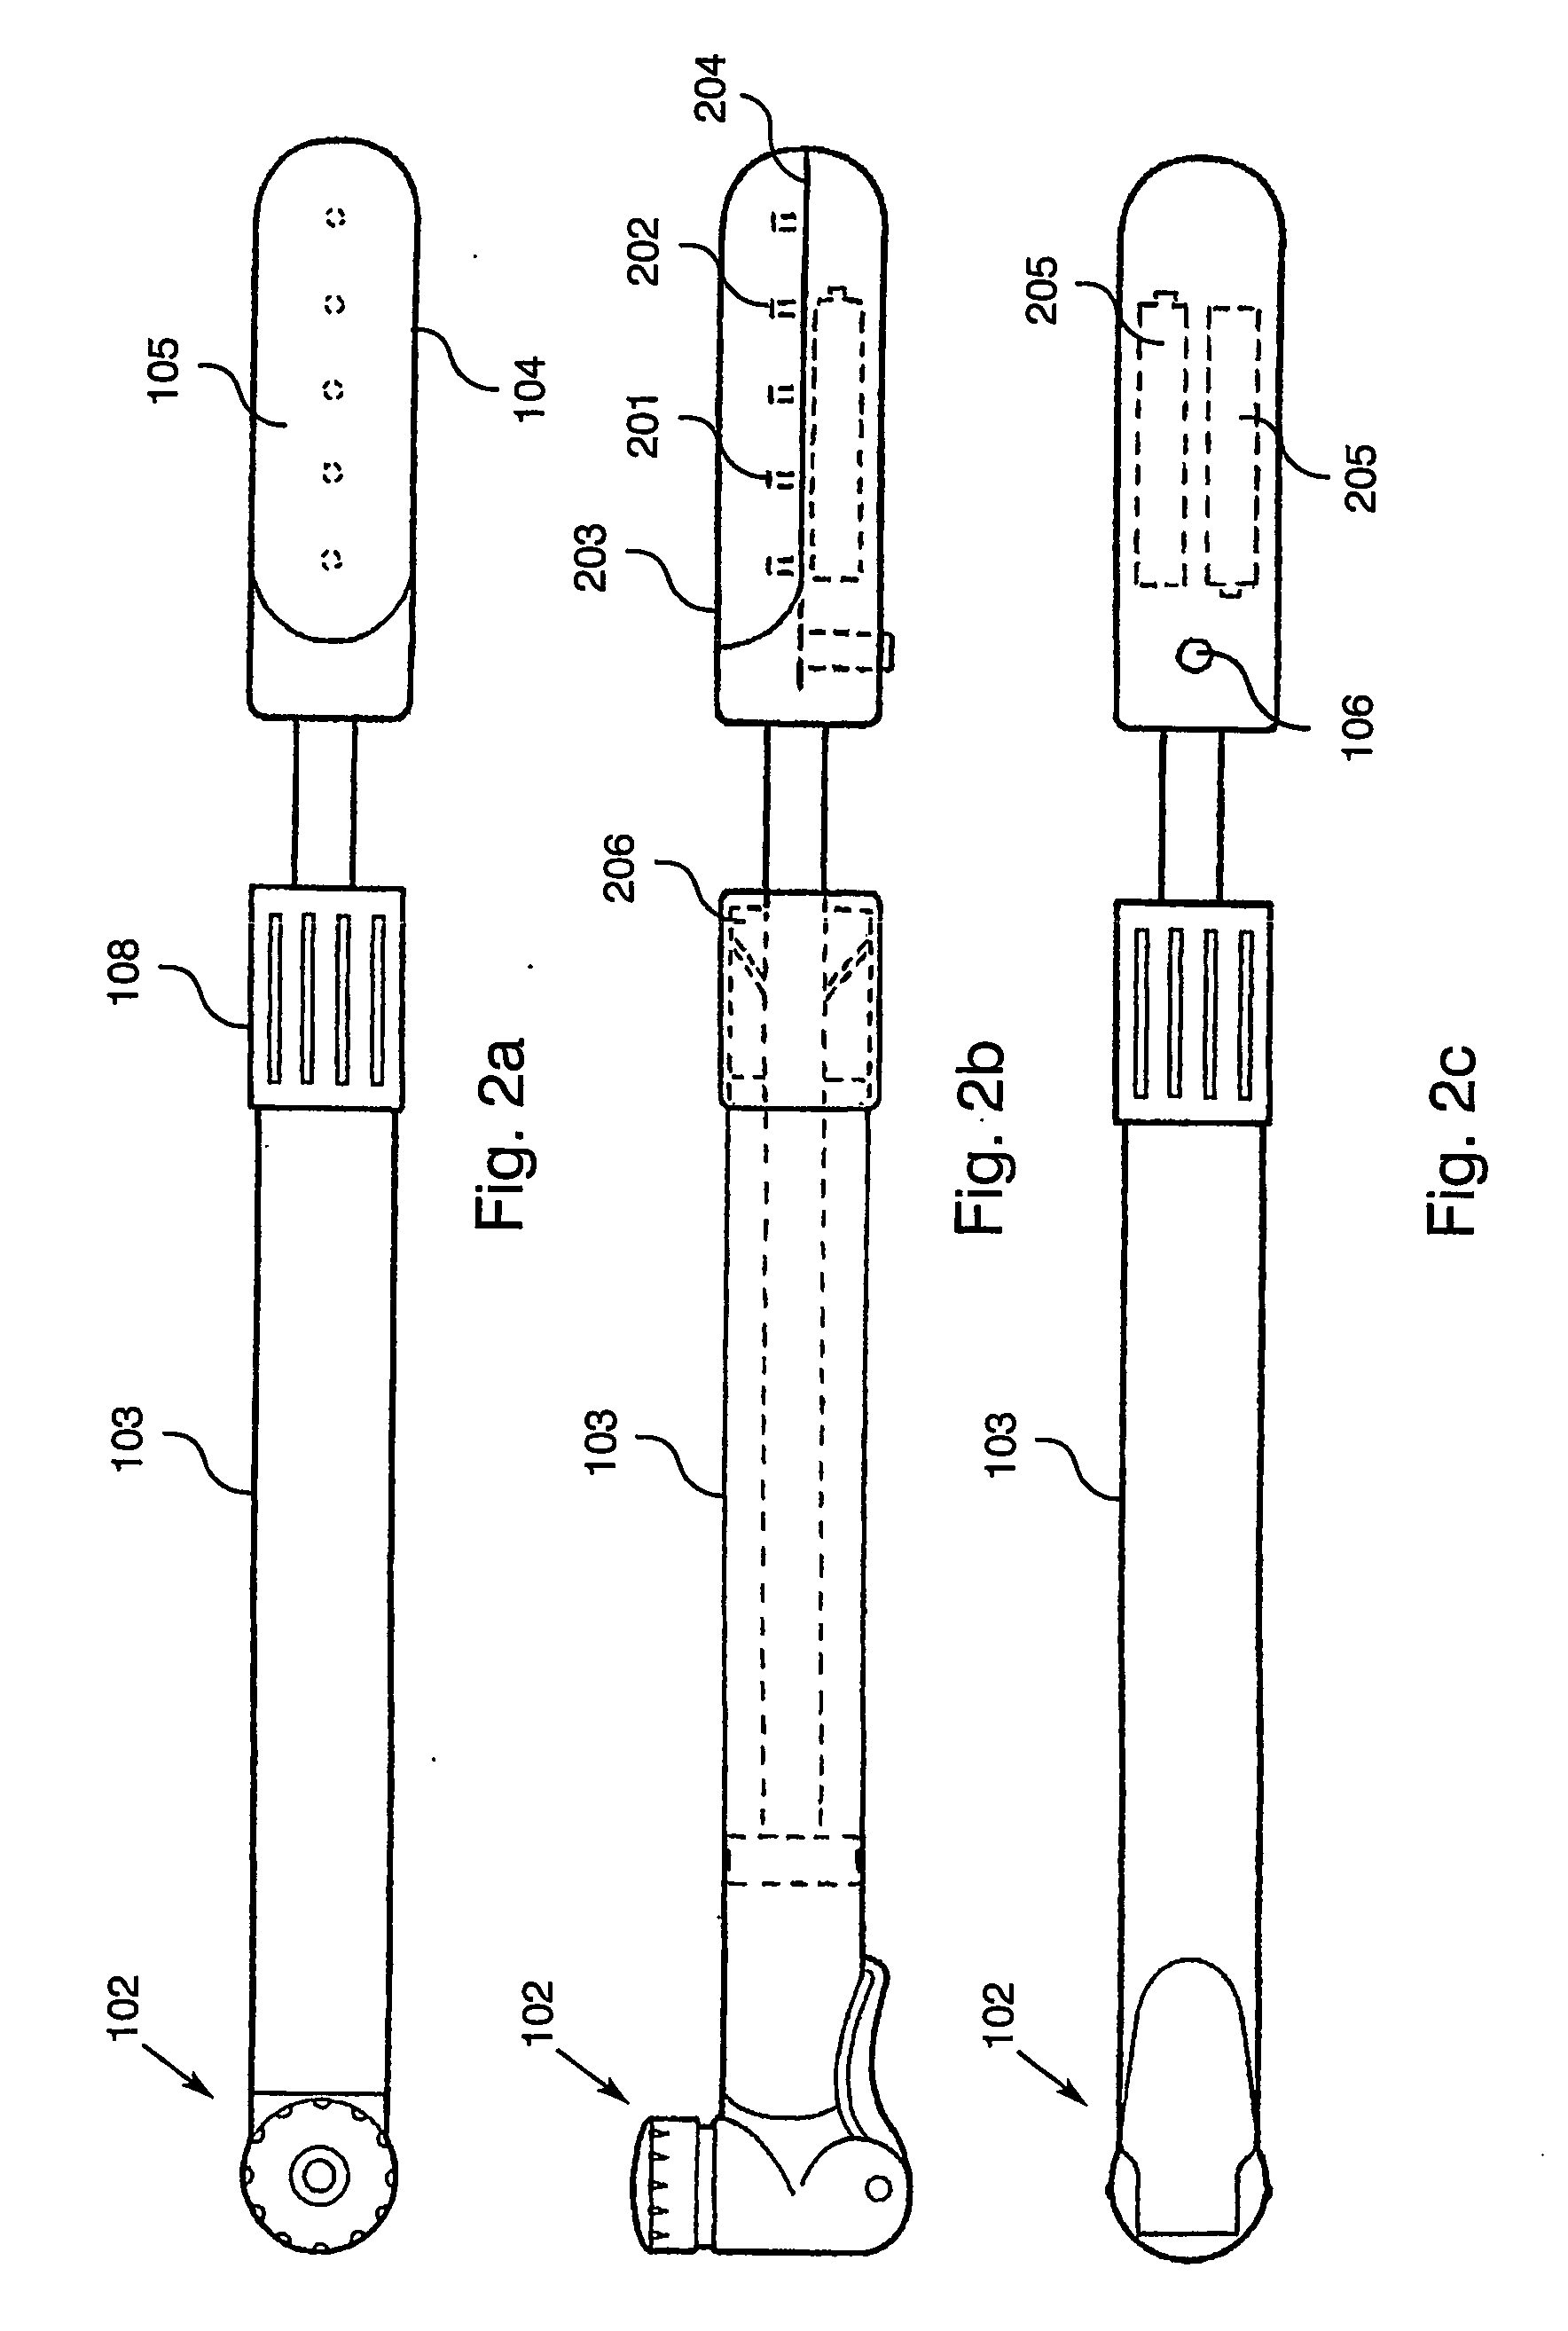 Vehicle safety warning signal devices and system for use on a bicycle, motorcycle or like vehicle